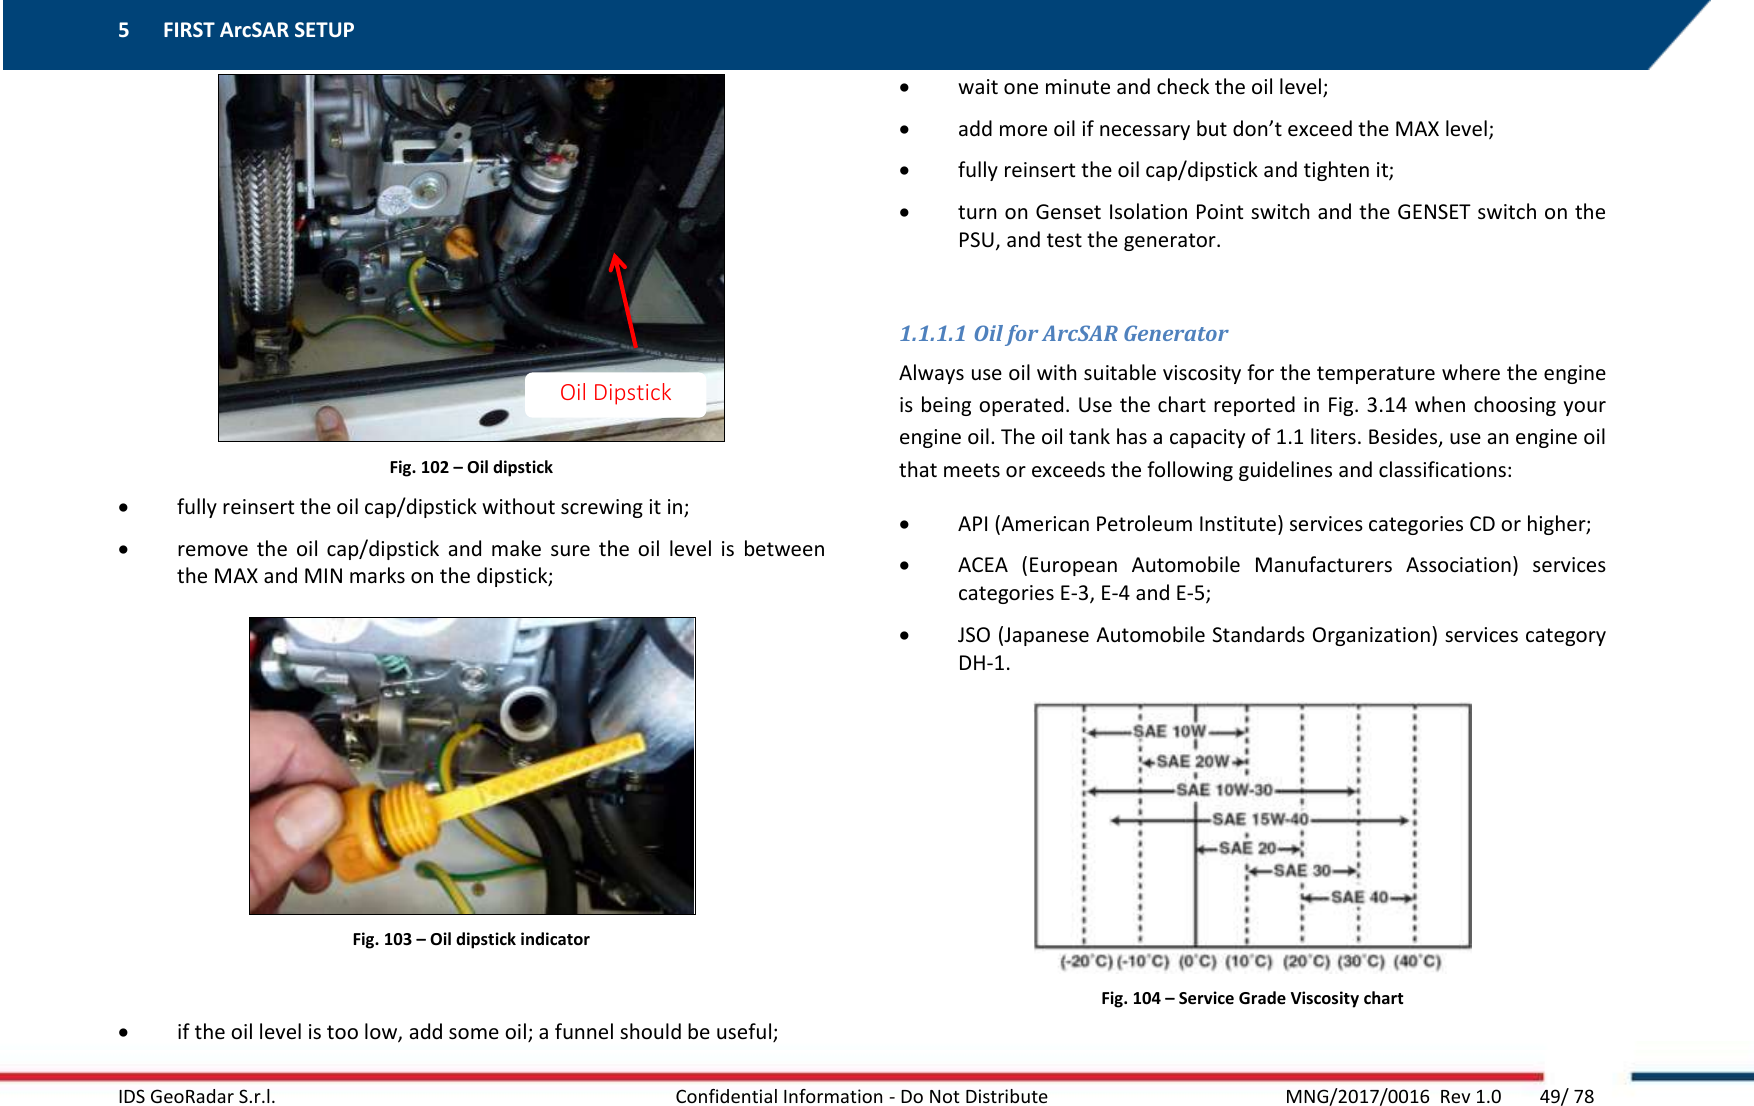 5 FIRST ArcSAR SETUP    IDS GeoRadar S.r.l.  Confidential Information - Do Not Distribute     MNG/2017/0016  Rev 1.0        49/ 78  Fig. 102 – Oil dipstick  fully reinsert the oil cap/dipstick without screwing it in;  remove  the  oil  cap/dipstick and  make  sure  the  oil  level  is  between the MAX and MIN marks on the dipstick;  Fig. 103 – Oil dipstick indicator   if the oil level is too low, add some oil; a funnel should be useful;  wait one minute and check the oil level;  add more oil if necessary but don’t exceed the MAX level;  fully reinsert the oil cap/dipstick and tighten it;  turn on Genset Isolation Point switch and the GENSET switch on the PSU, and test the generator.  1.1.1.1 Oil for ArcSAR Generator Always use oil with suitable viscosity for the temperature where the engine is being operated. Use the chart reported in Fig. 3.14 when choosing your engine oil. The oil tank has a capacity of 1.1 liters. Besides, use an engine oil that meets or exceeds the following guidelines and classifications:  API (American Petroleum Institute) services categories CD or higher;  ACEA  (European  Automobile  Manufacturers  Association)  services categories E-3, E-4 and E-5;  JSO (Japanese Automobile Standards Organization) services category DH-1.  Fig. 104 – Service Grade Viscosity chart  Oil Dipstick 